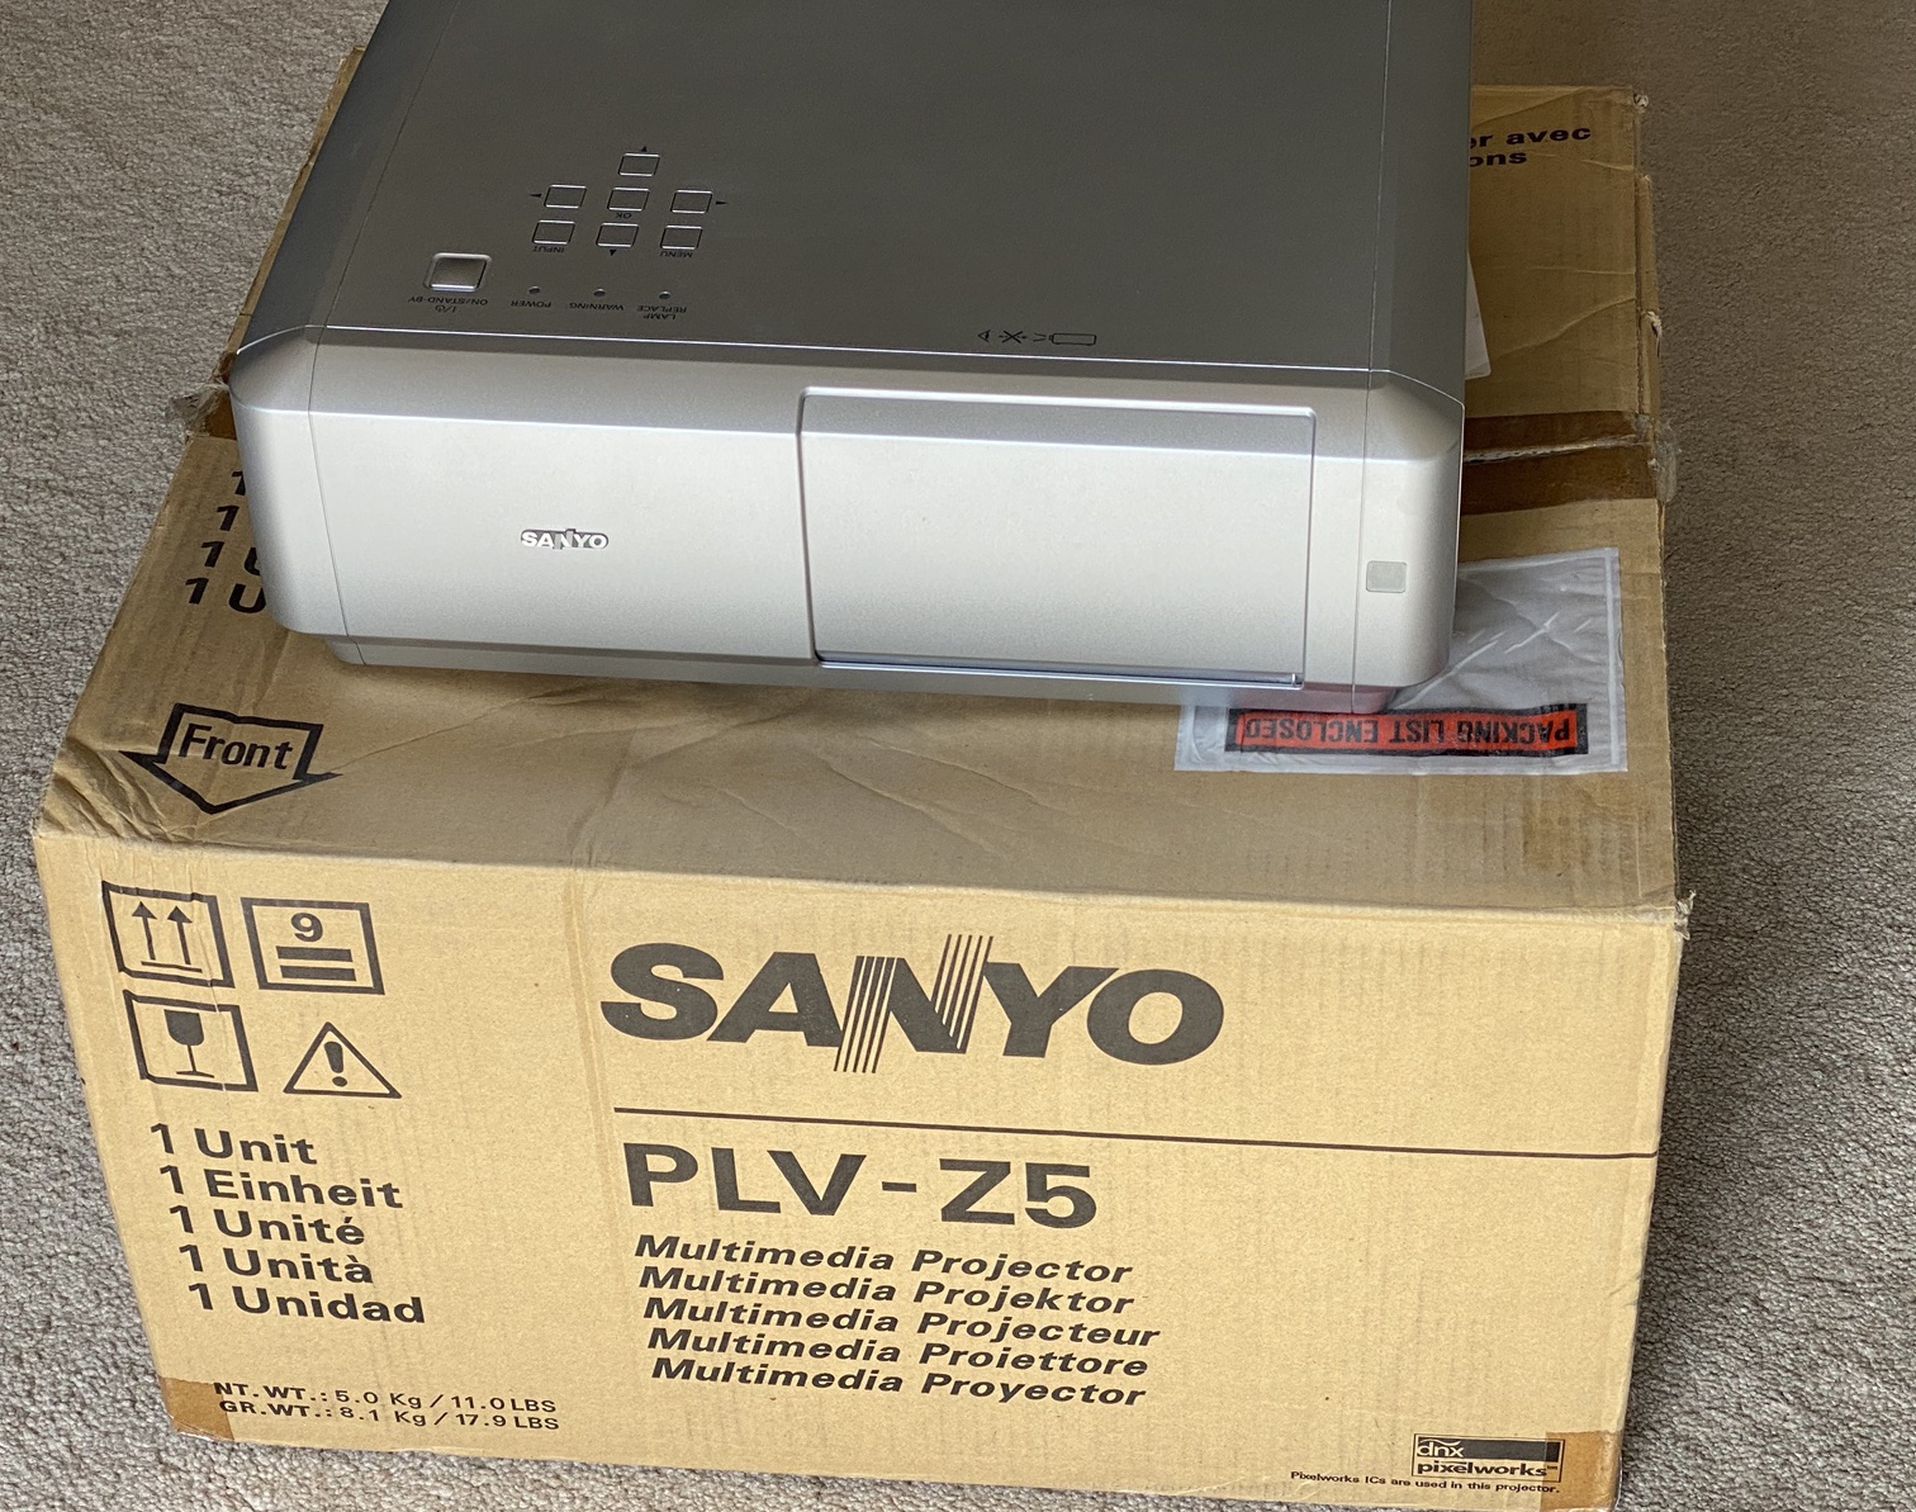 Sanyo PLV-Z5 Home Theater Projector